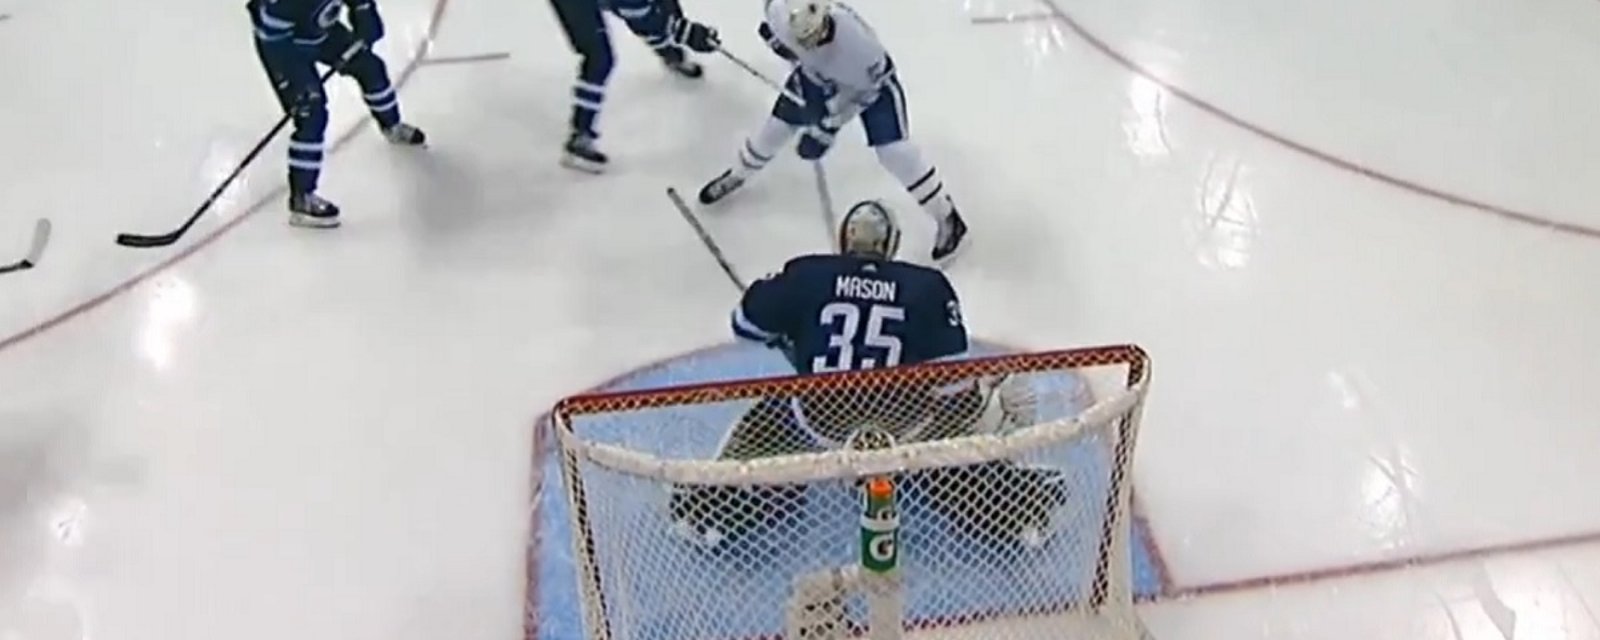 Patrick Marleau scores his first as a Leaf, and it's a beauty.